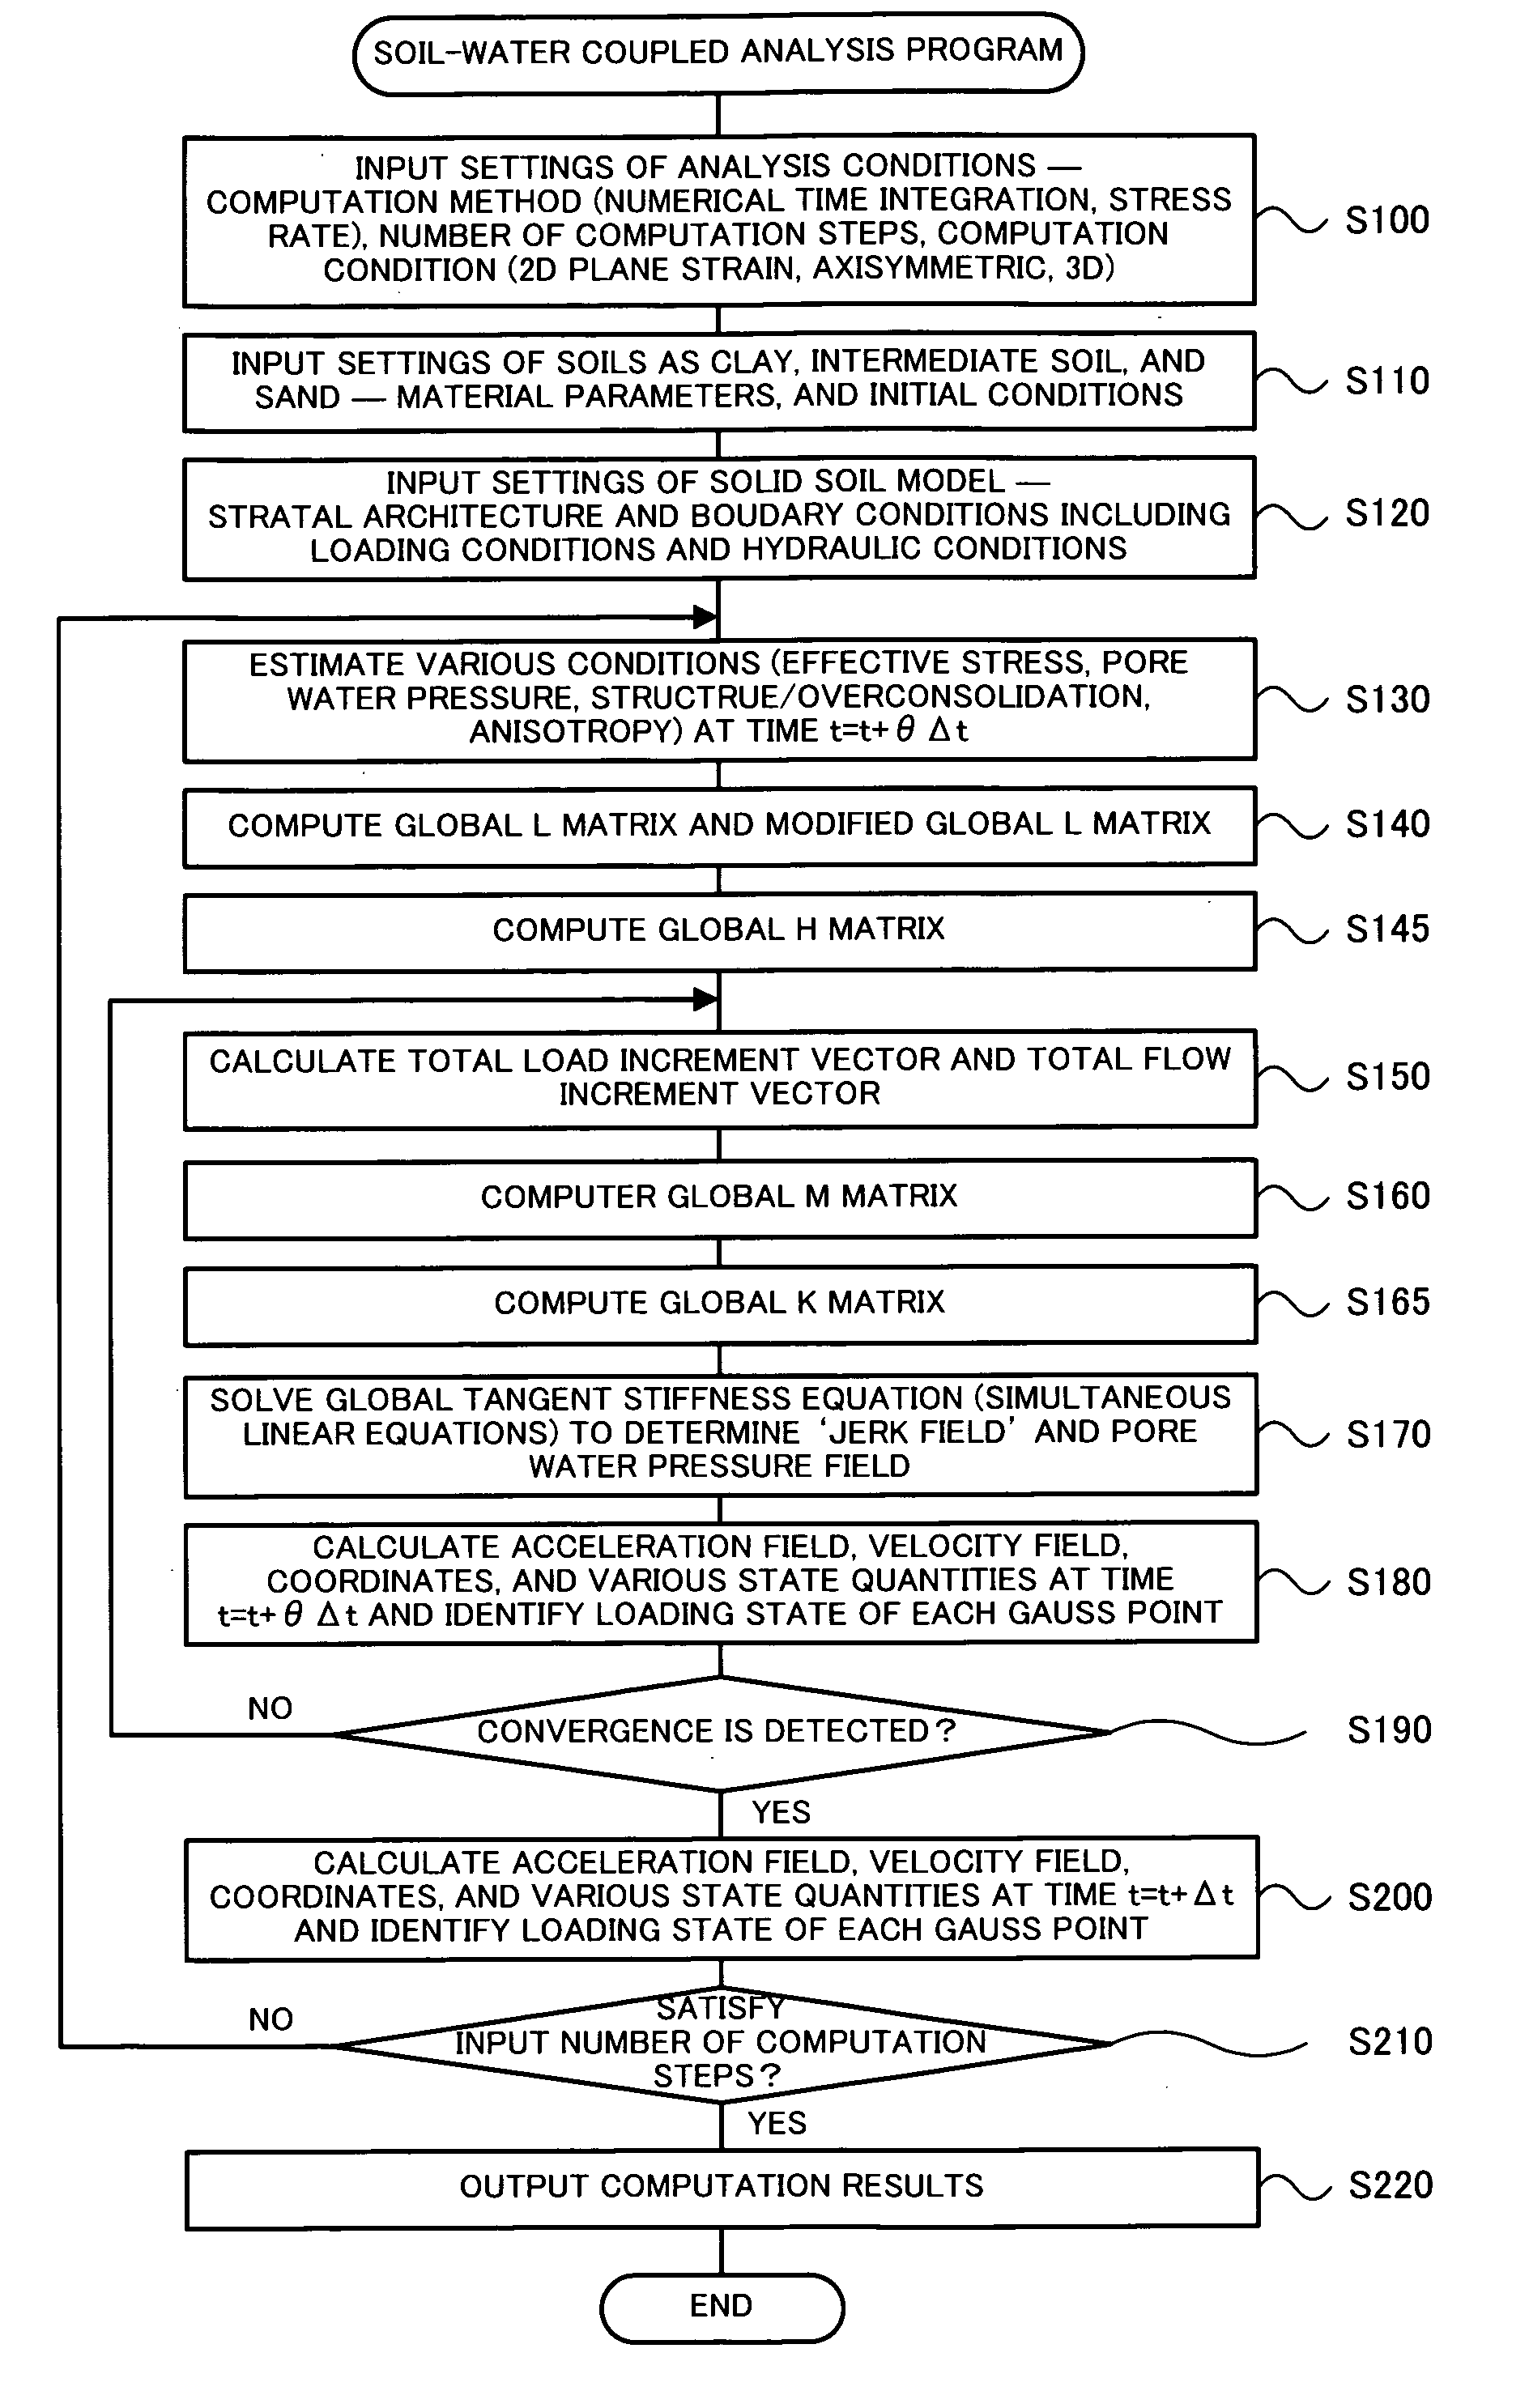 Soil-Water Coupled Analyzer and Soil-Water Coupled Analysis Method